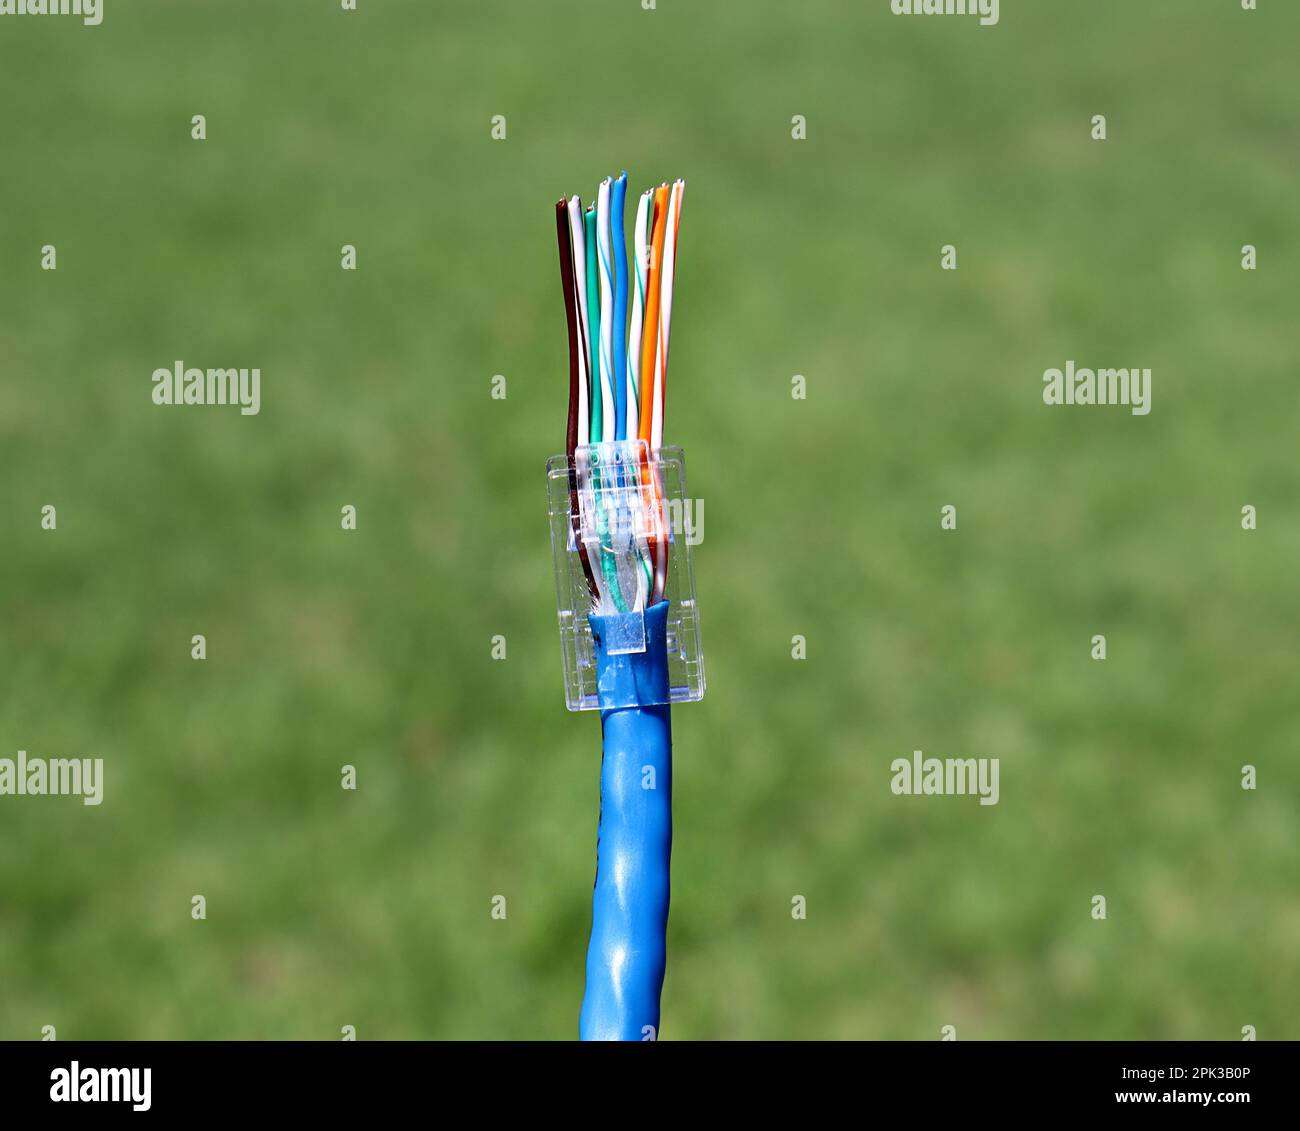 RJ45 ethernet connection Wiring T568B standard Stock Photo